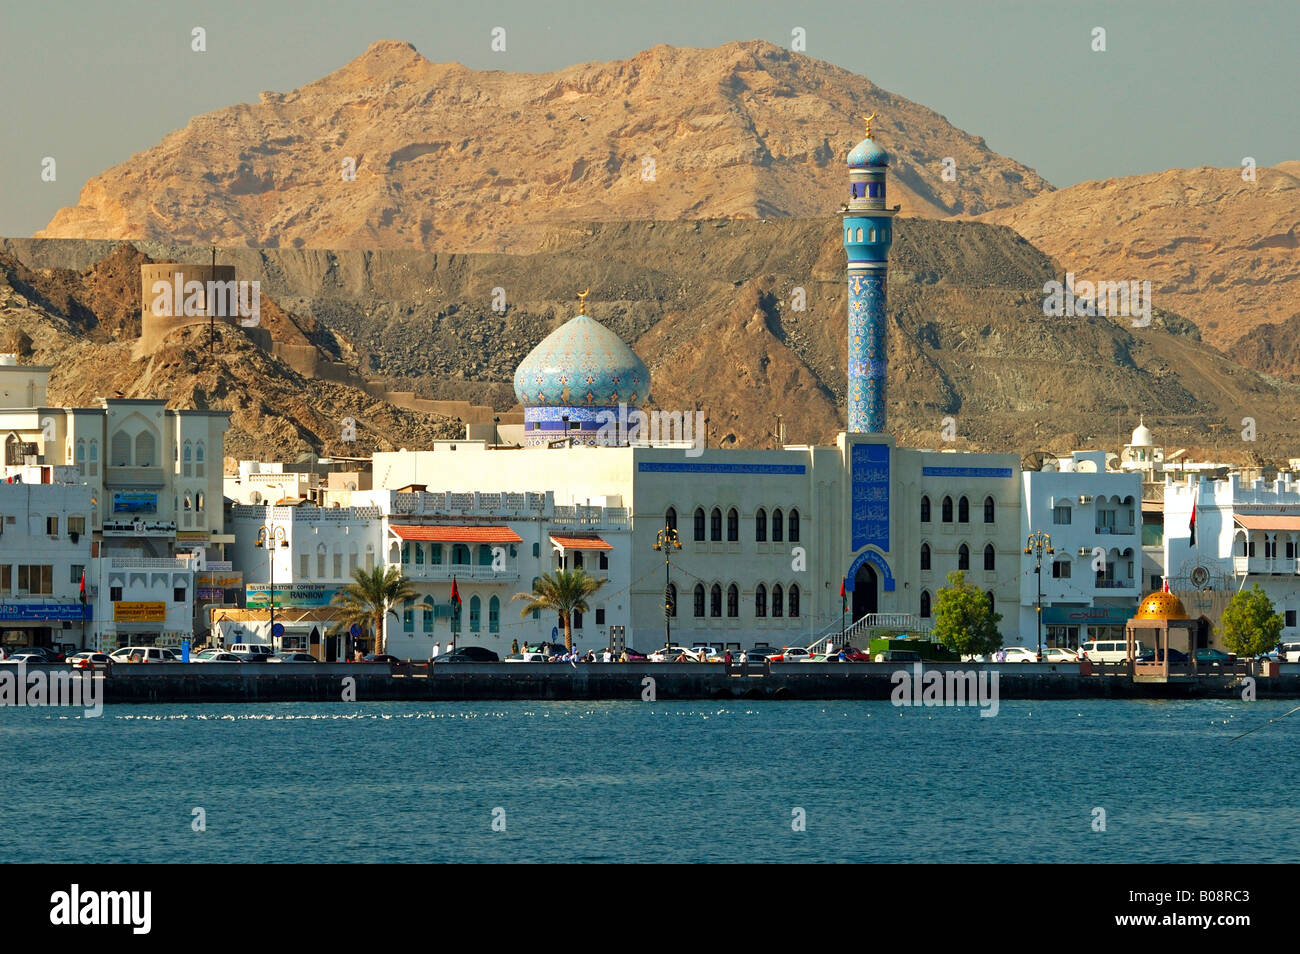 Image of the Muttrah district, Muscat, Sultanate of Oman, Middle East Stock Photo